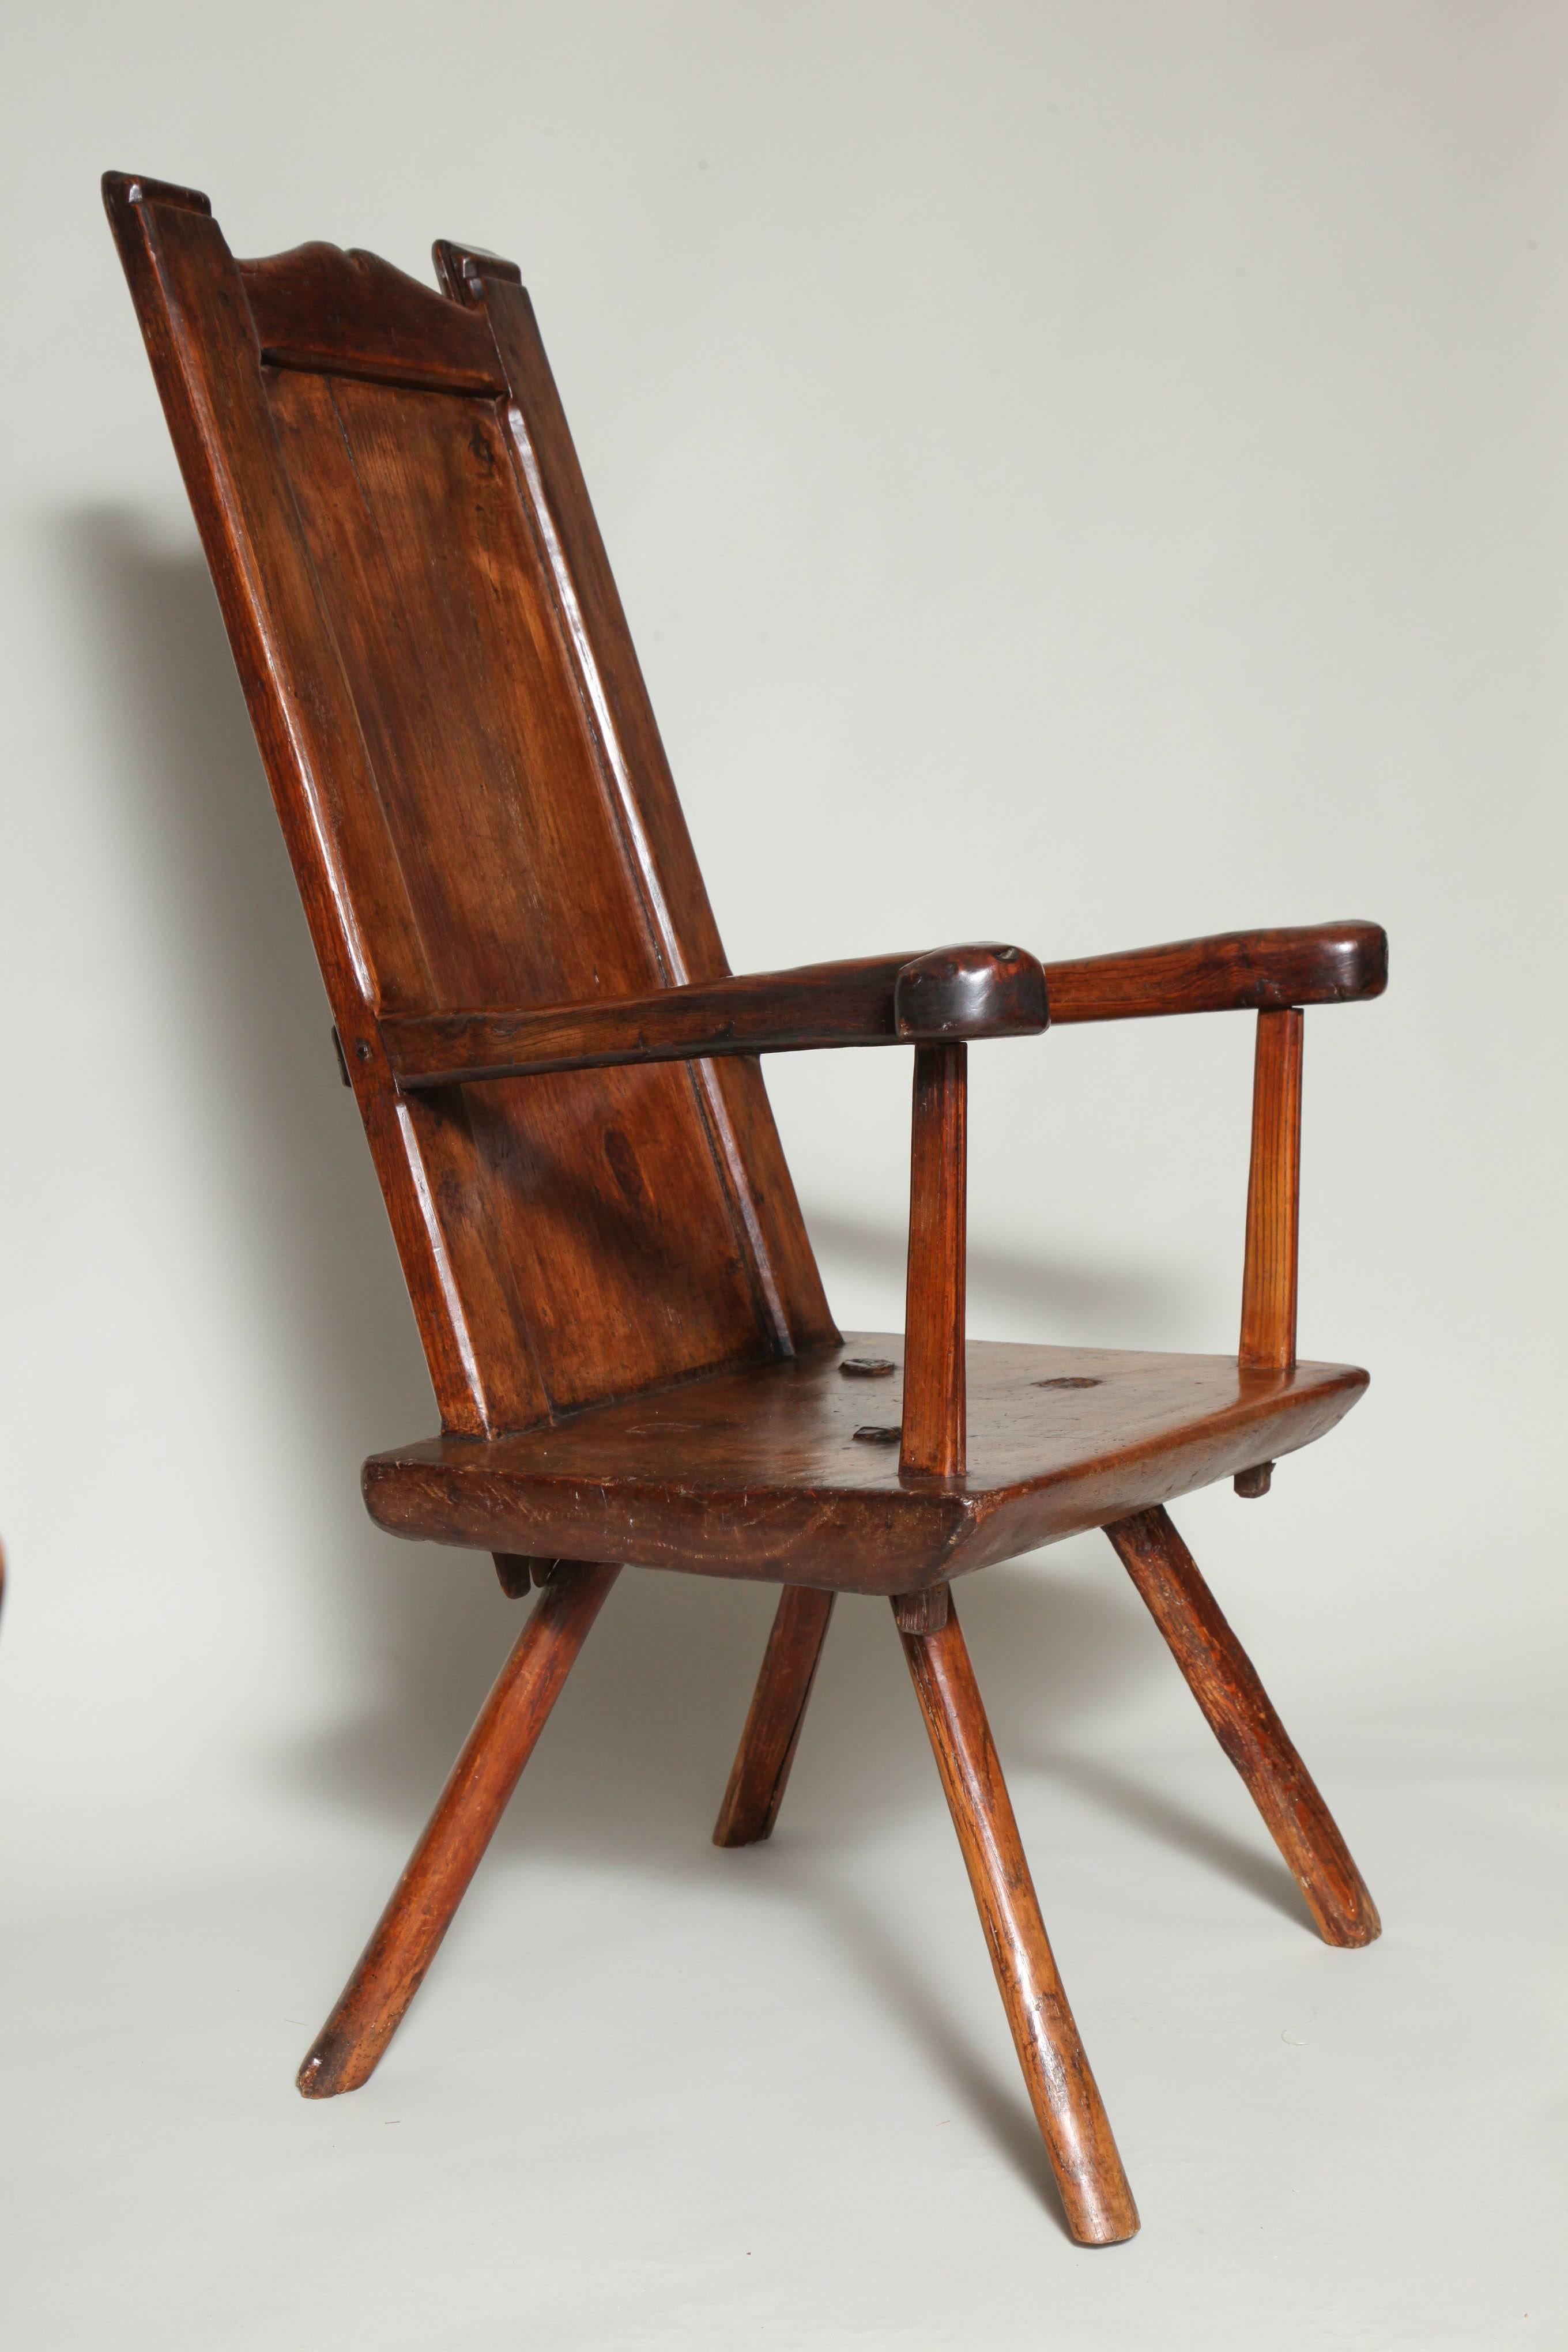 Country 18th or Early 19th Century Shepherd's Chair